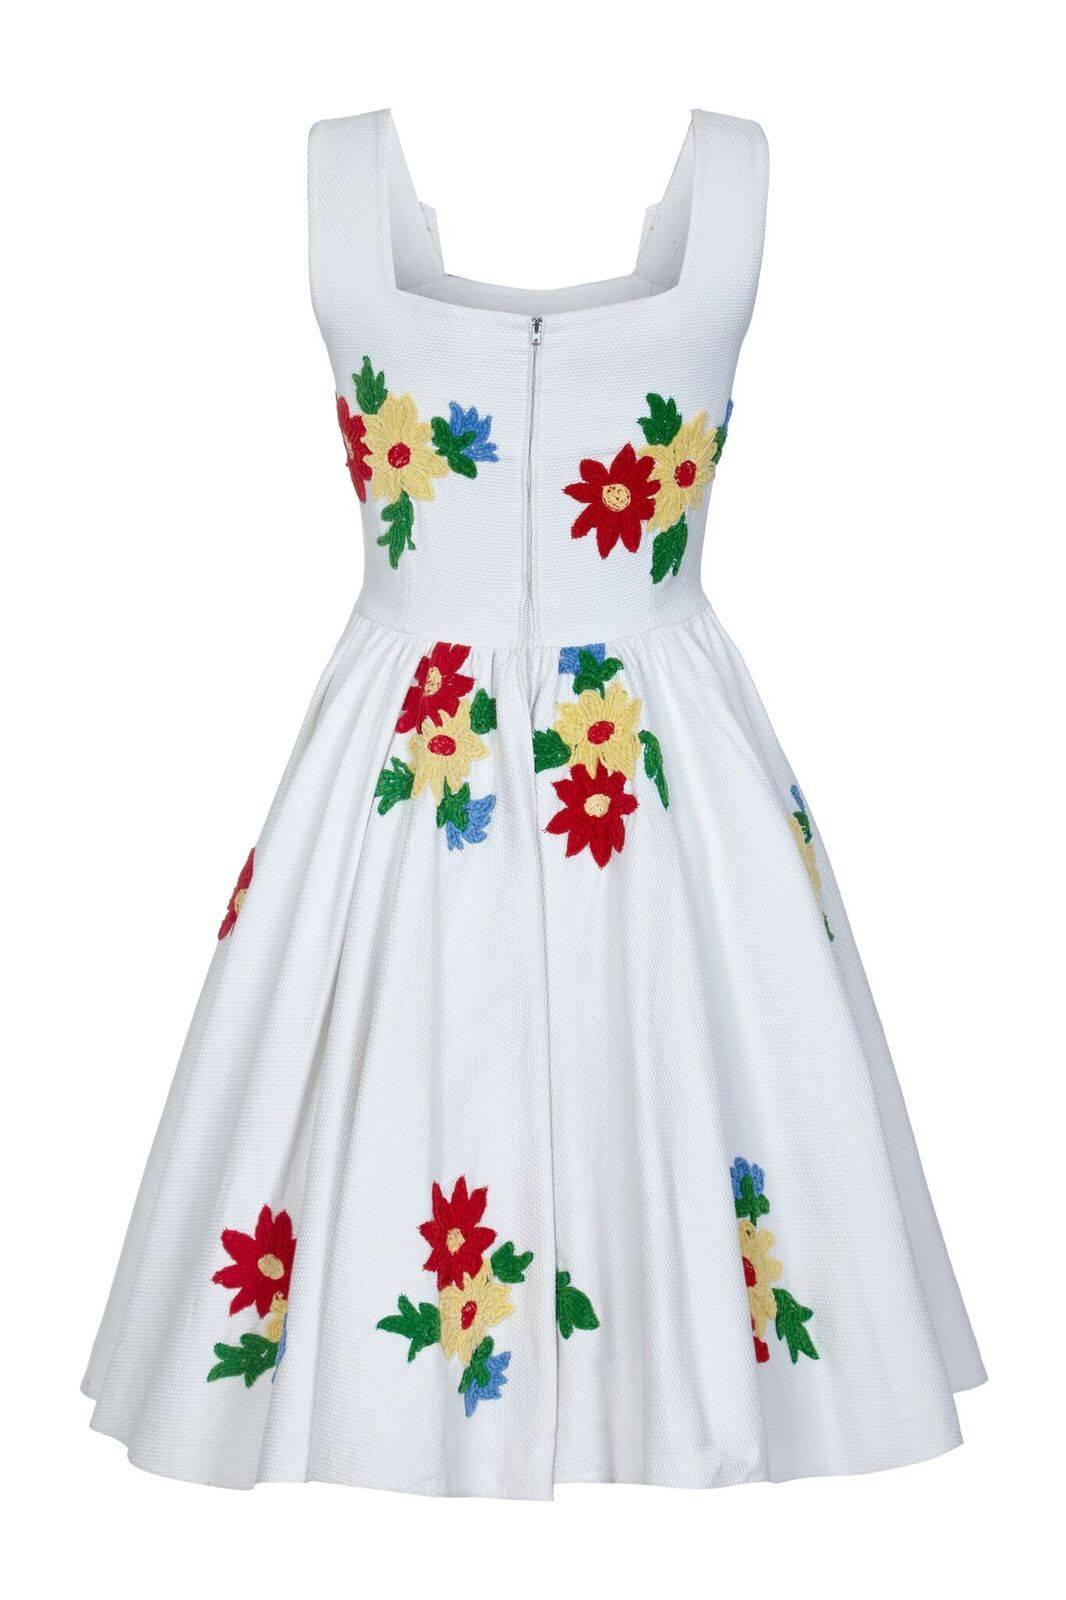 This charming early 1950s French summer dress with embroidered floral embellishment is in wonderful vintage condition. The white heavy weave cotton fabric is beautifully adorned with embroidered chenille candlewick flowers in vibrant Blue, Red,